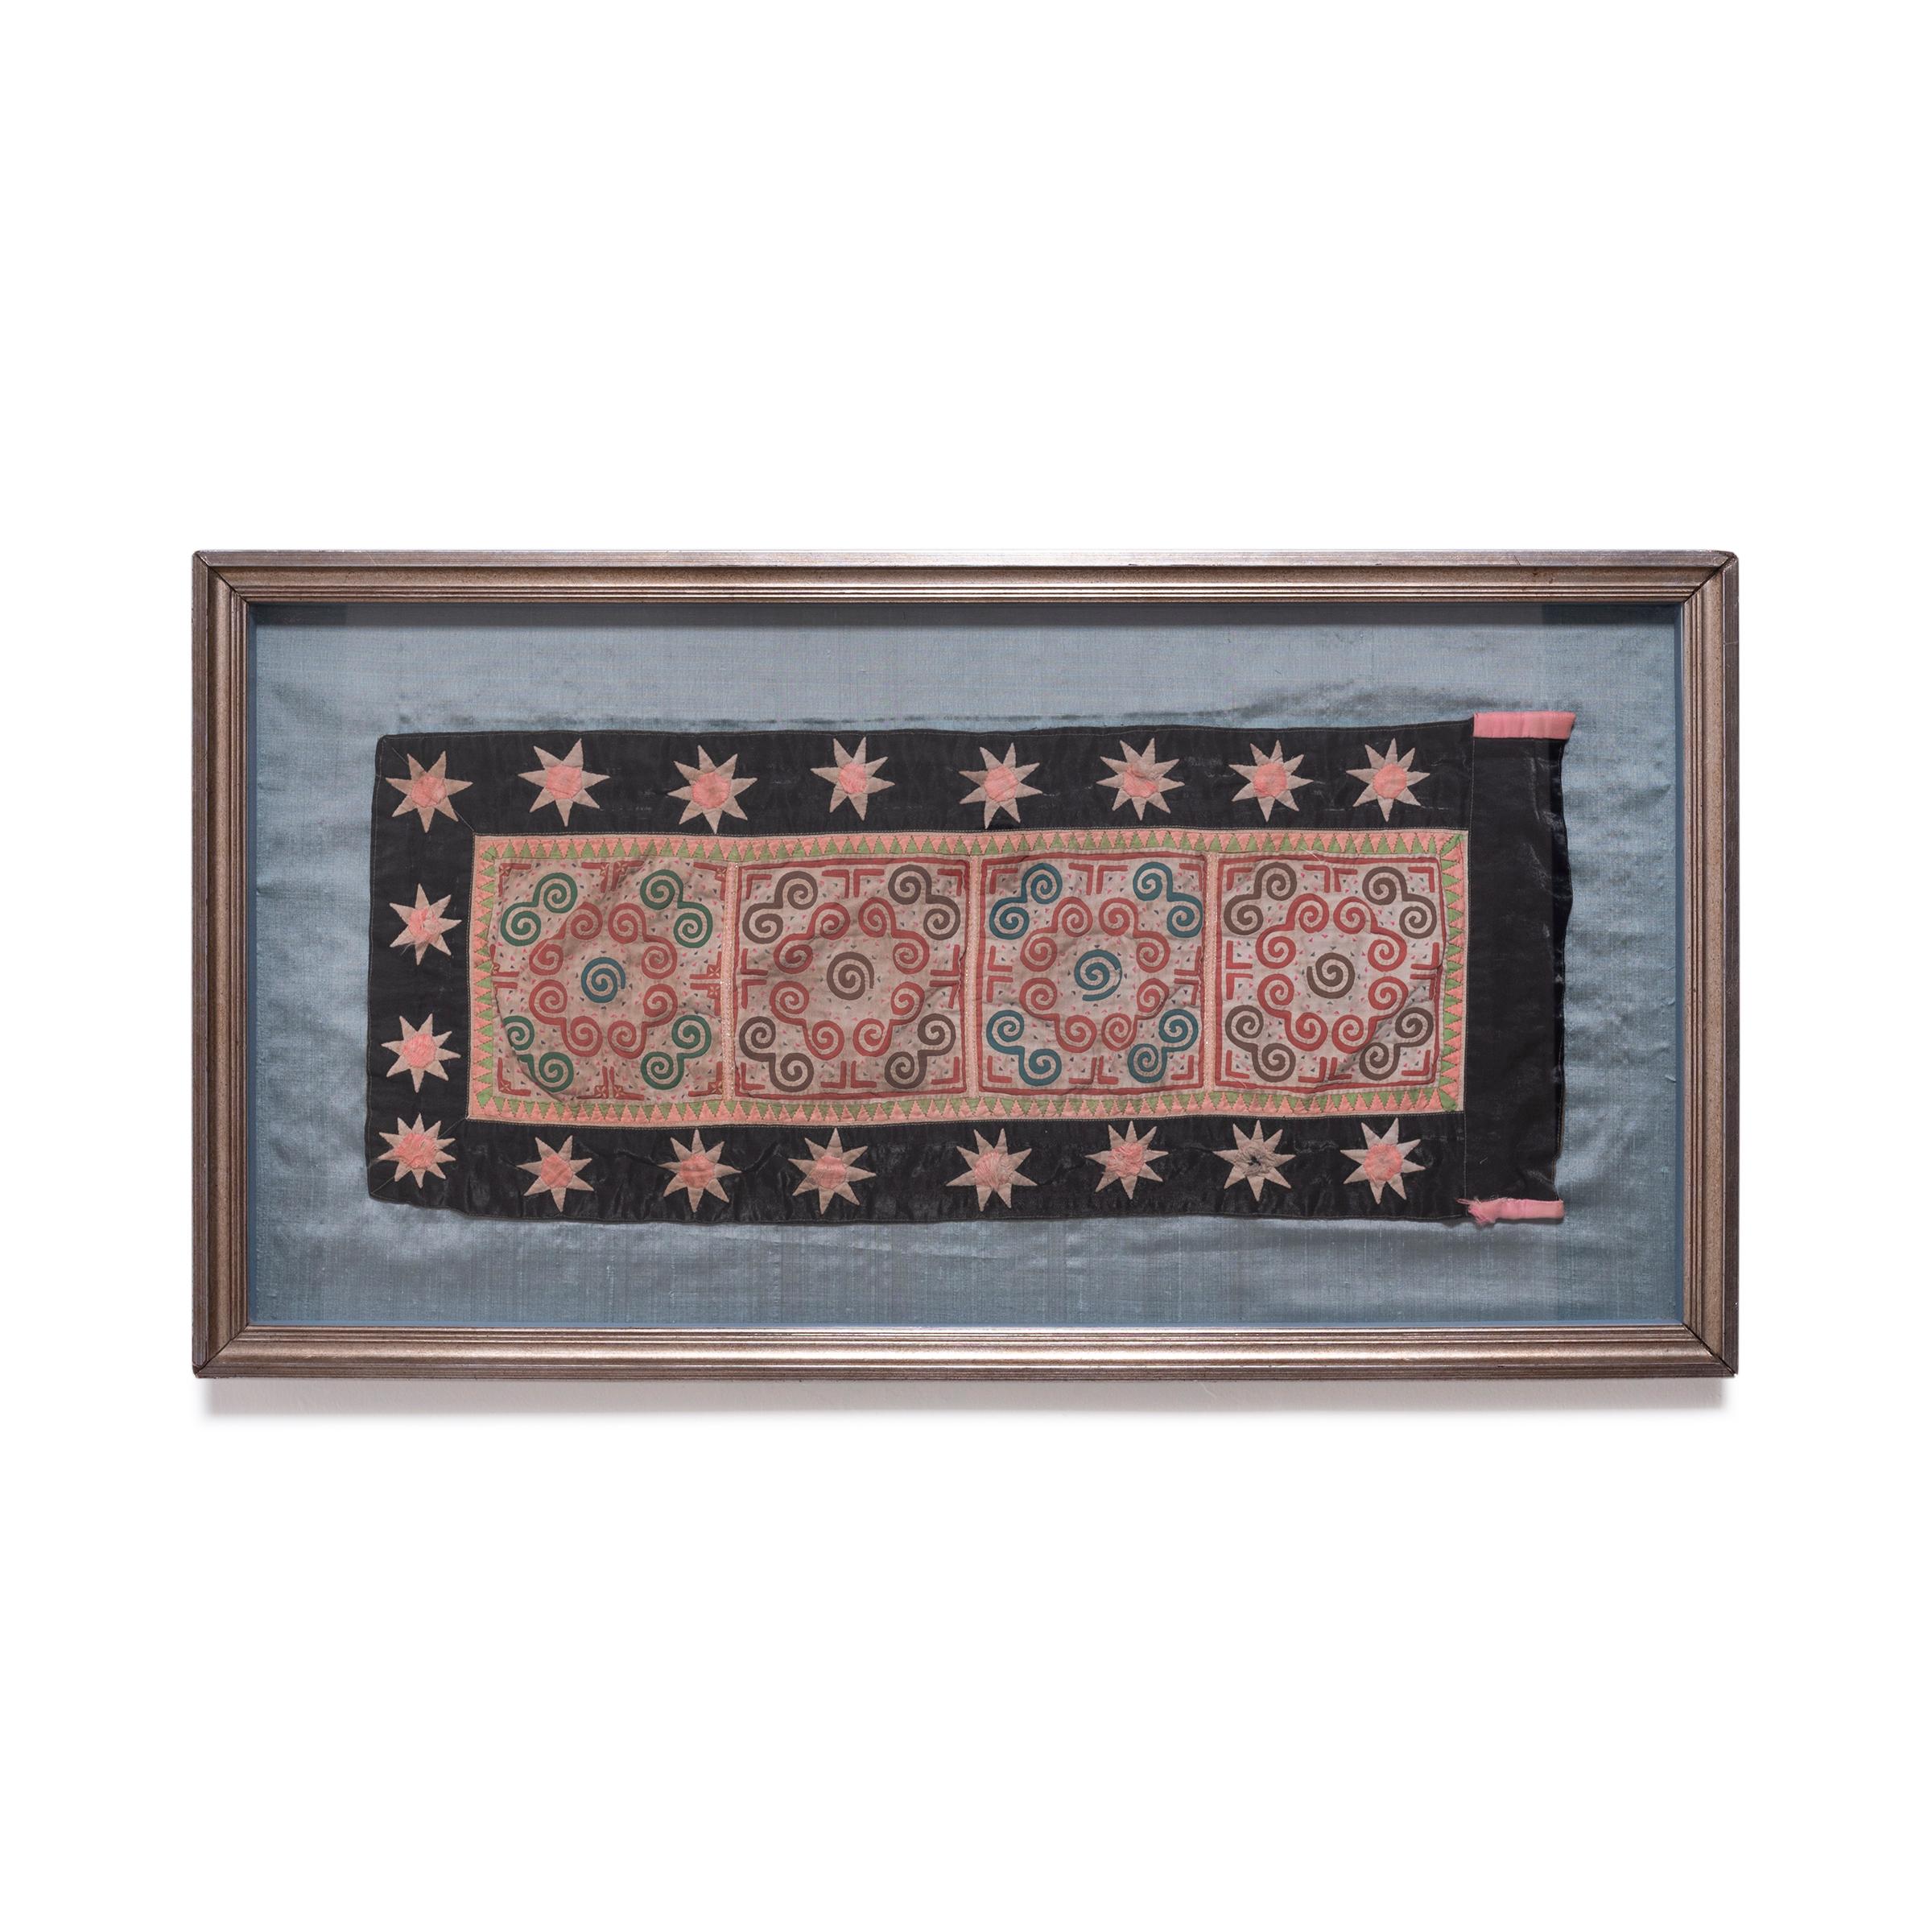 Framed Hmong Appliqué Textile Fragment - Art by Unknown